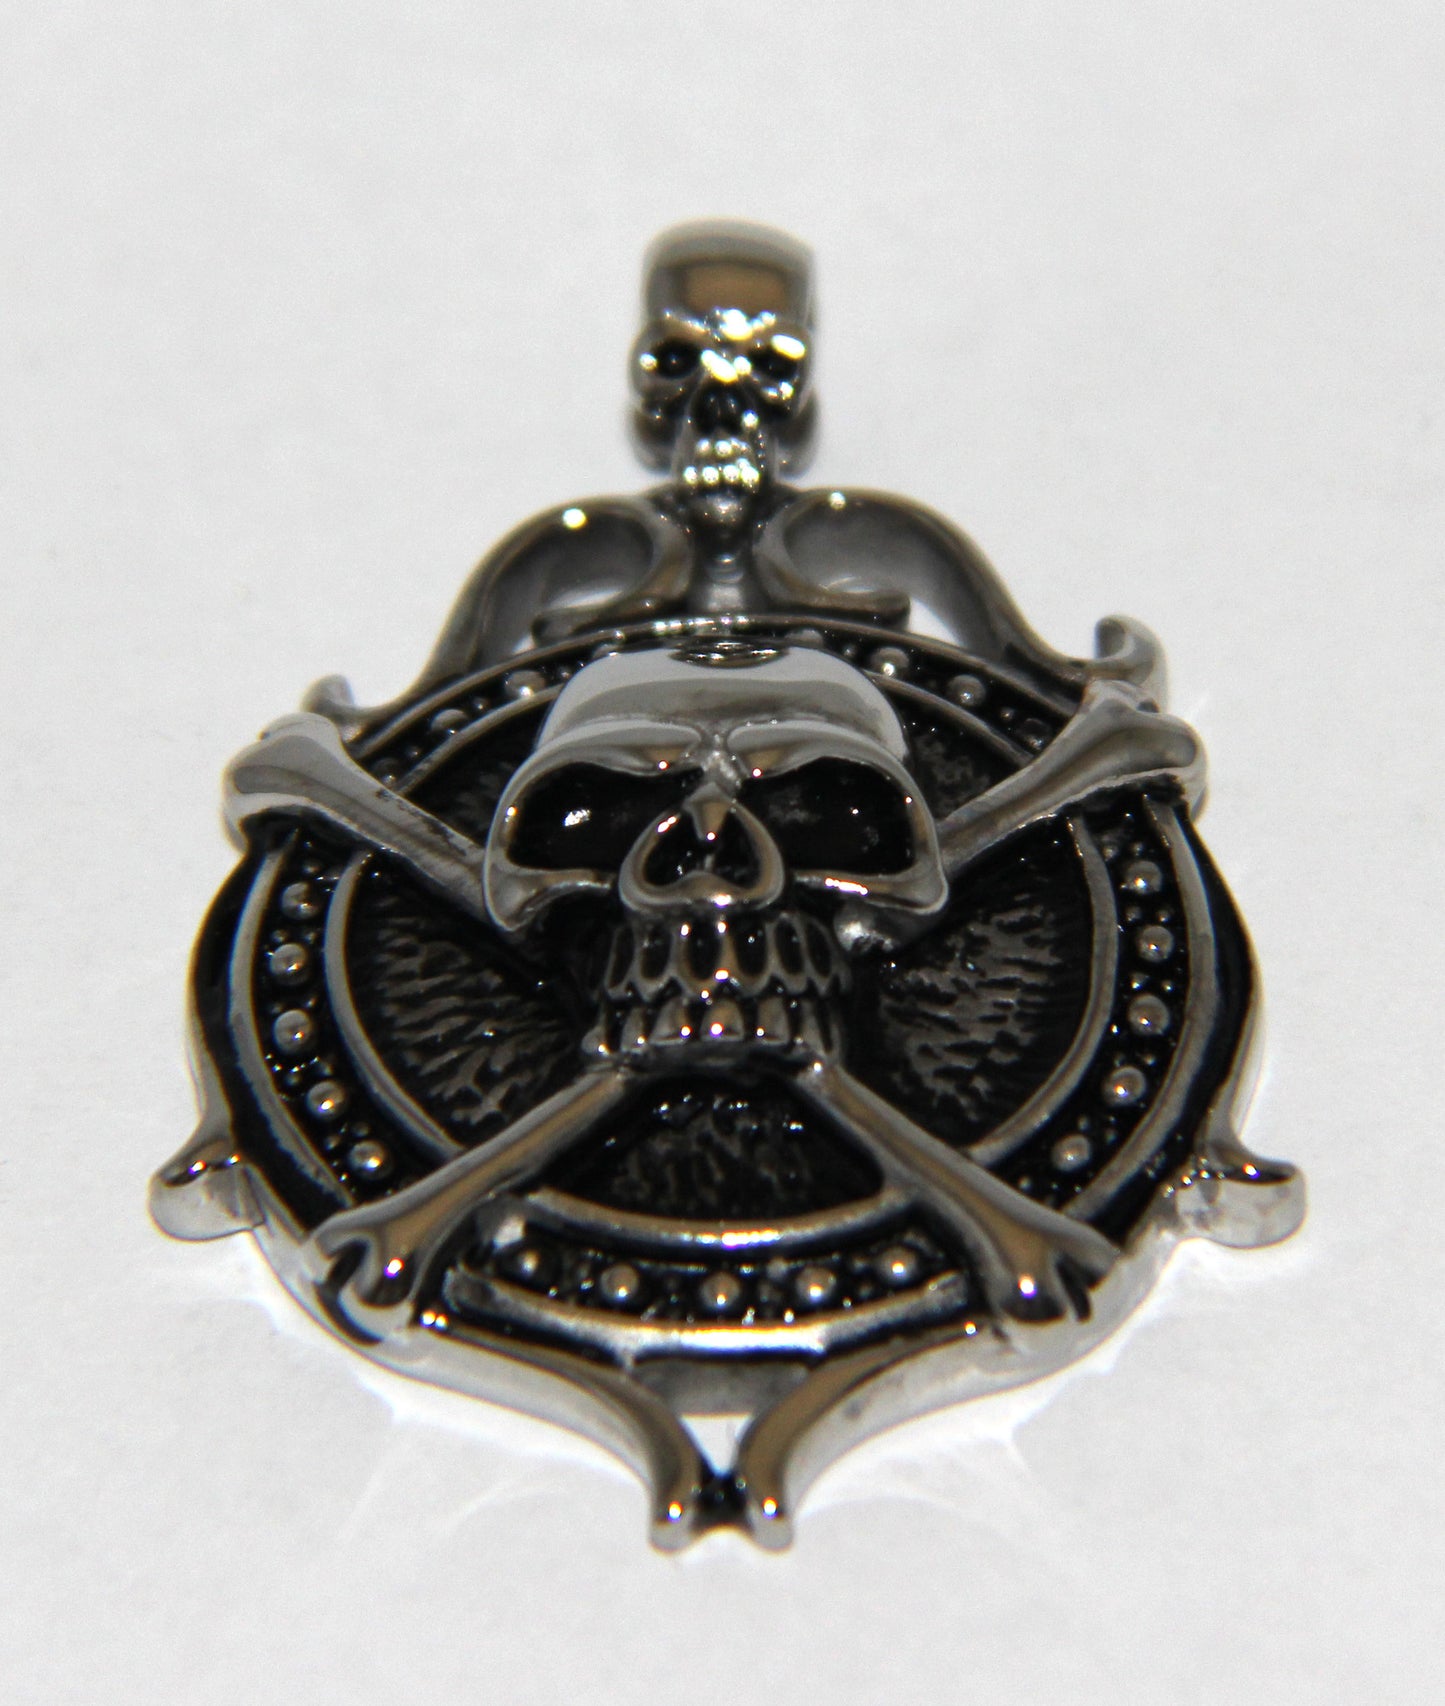 Stainless Steel Skull Shield with Cross and Bone- UDINC0486